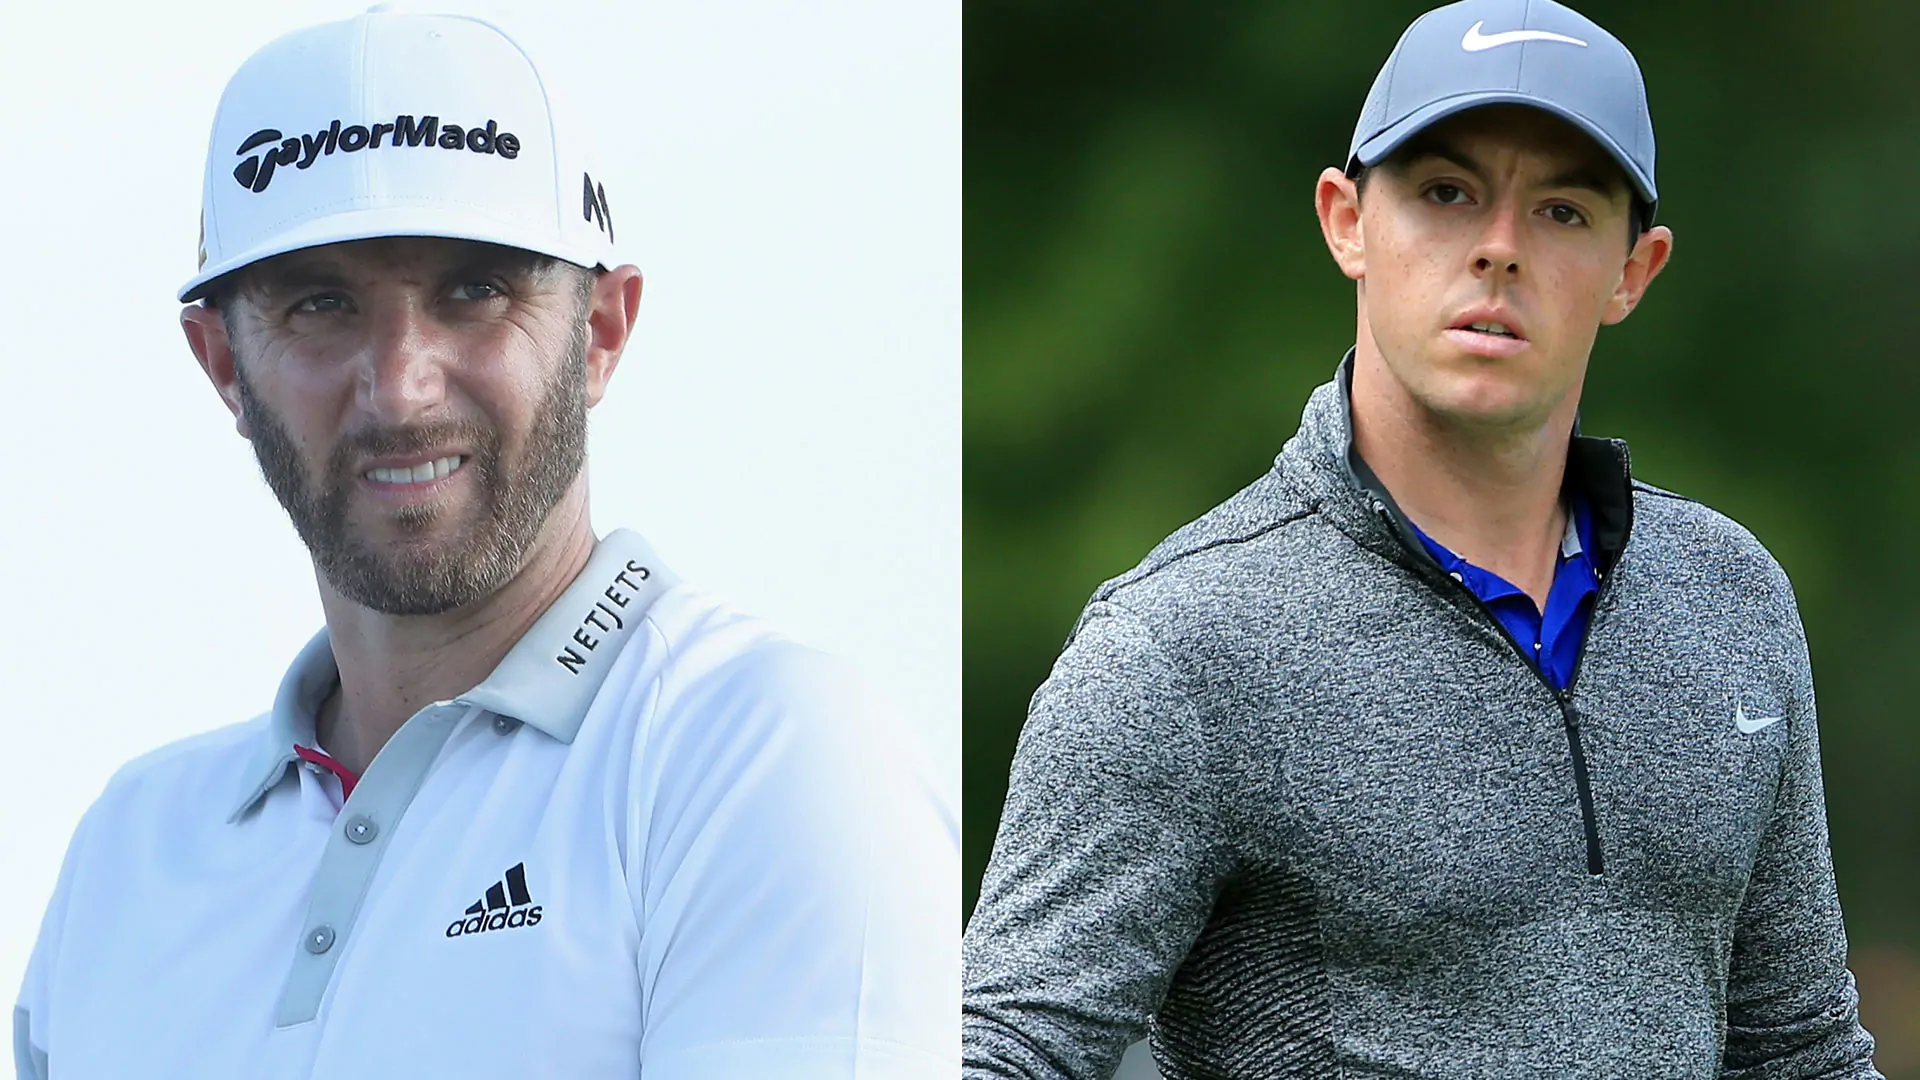 Johnson, McIlroy betting co-favorites for U.S. Open